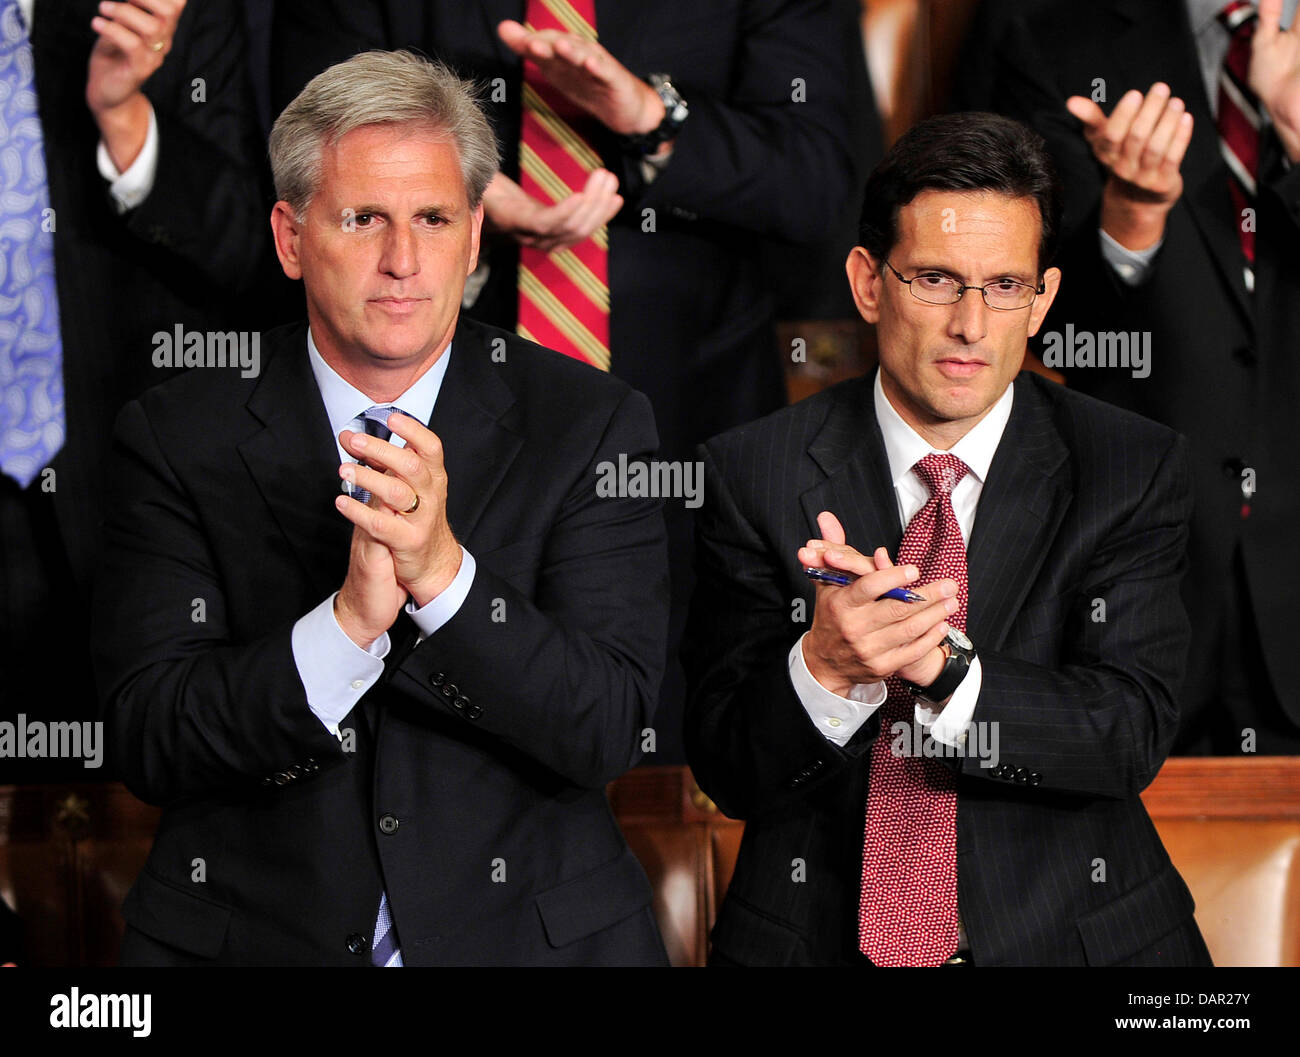 United States House Majority Whip Kevin McCarthy (Republican of California), left, and U.S. House Majority Leader Eric Cantor (Republican of Virginia), right, applaud as President Barack Obama delivers an address on jobs andthe economy to a Joint Session of Congress at the Capitol in Washington, D.C. on Thursday, September 8, 2011..Credit: Ron Sachs / CNP.(RESTRICTION: NO New York  Stock Photo